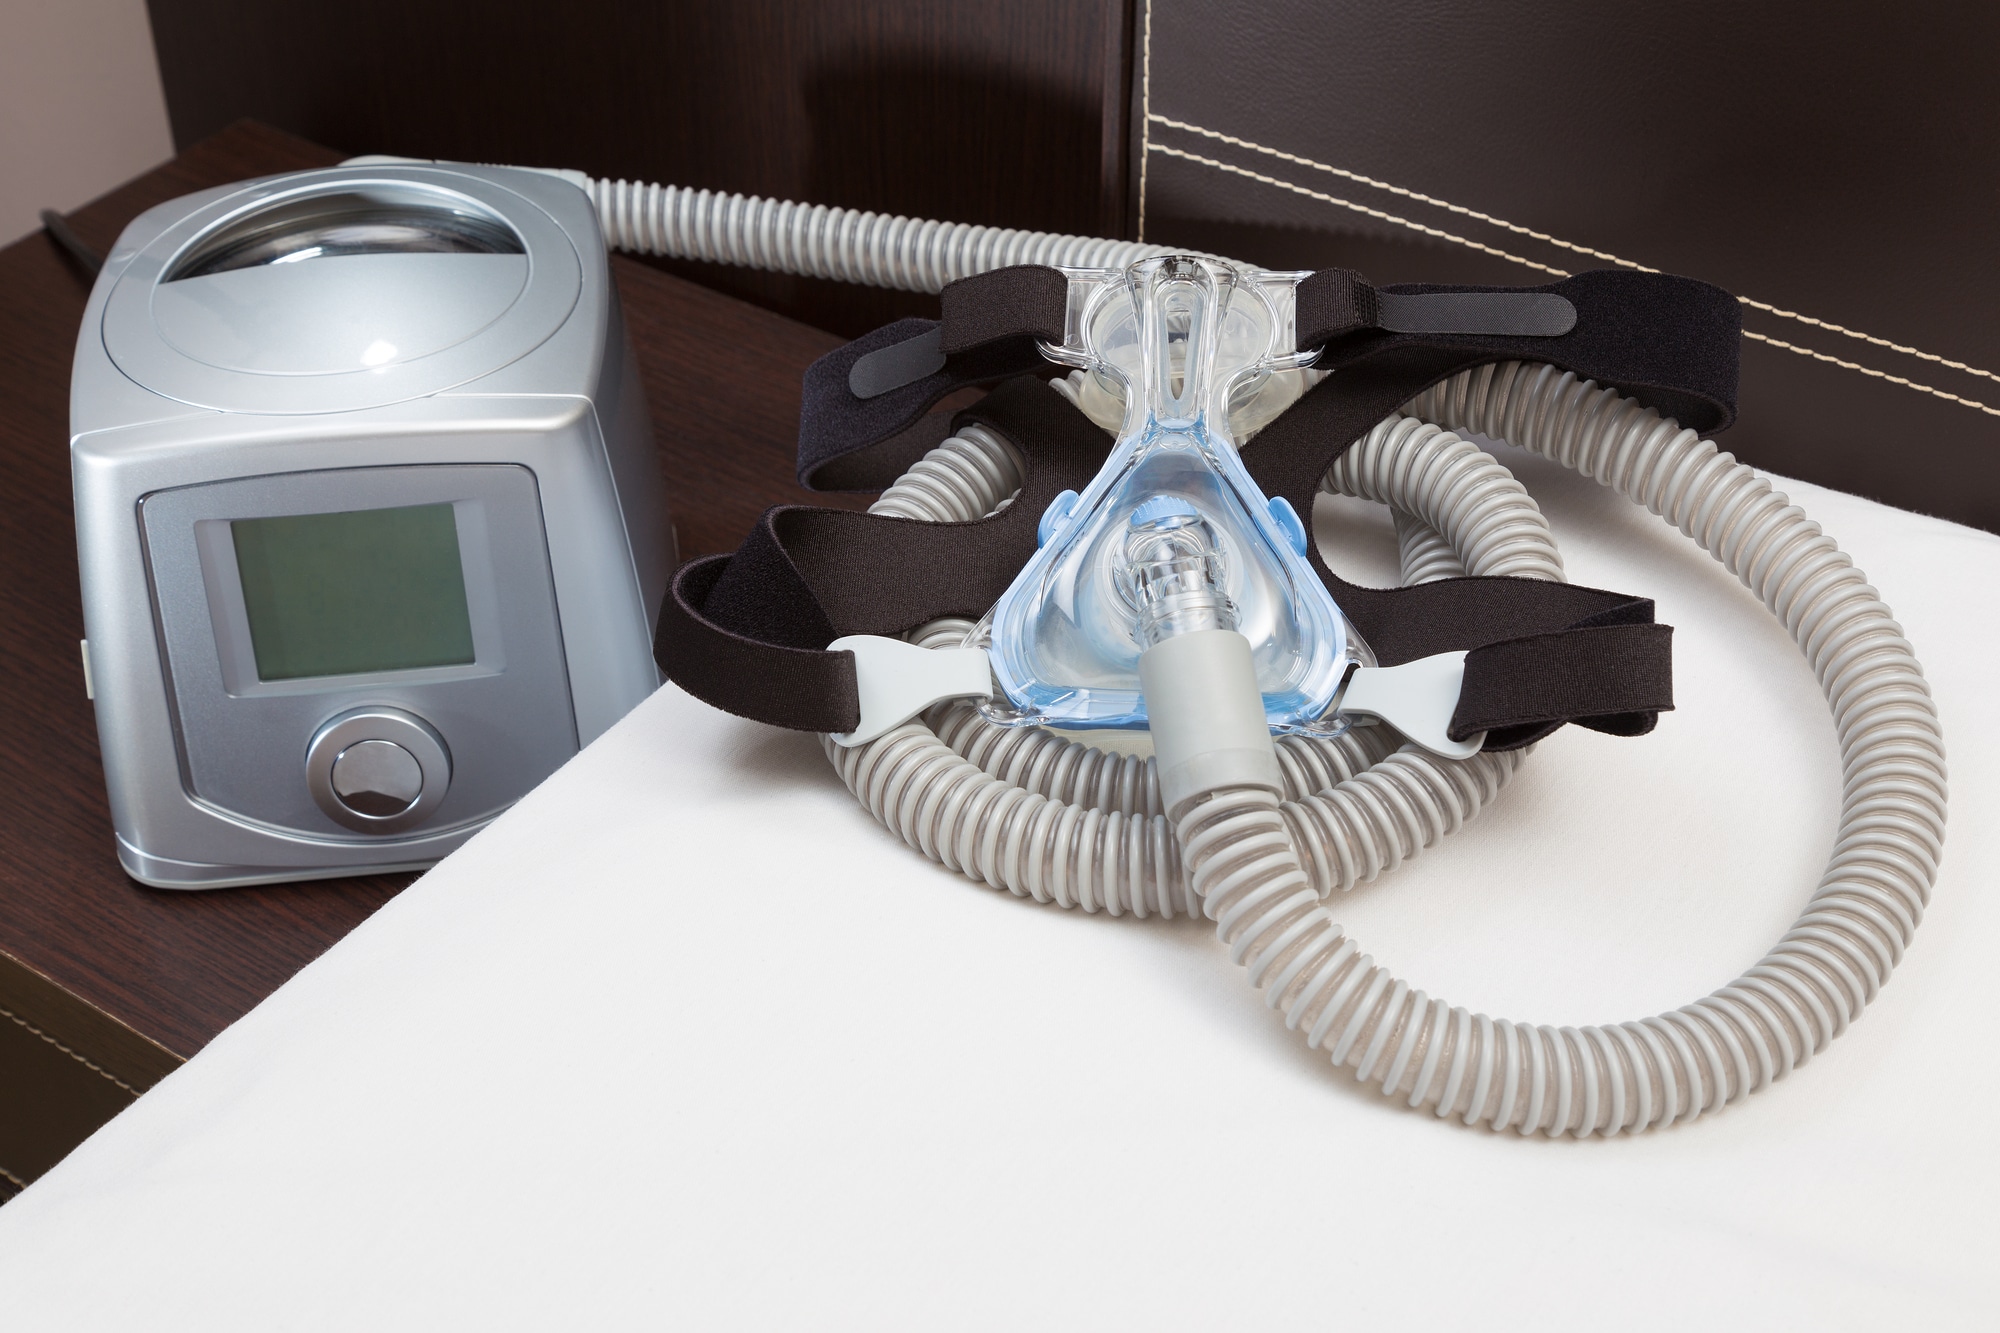 CPAP Machines for sale in Agency, Montana